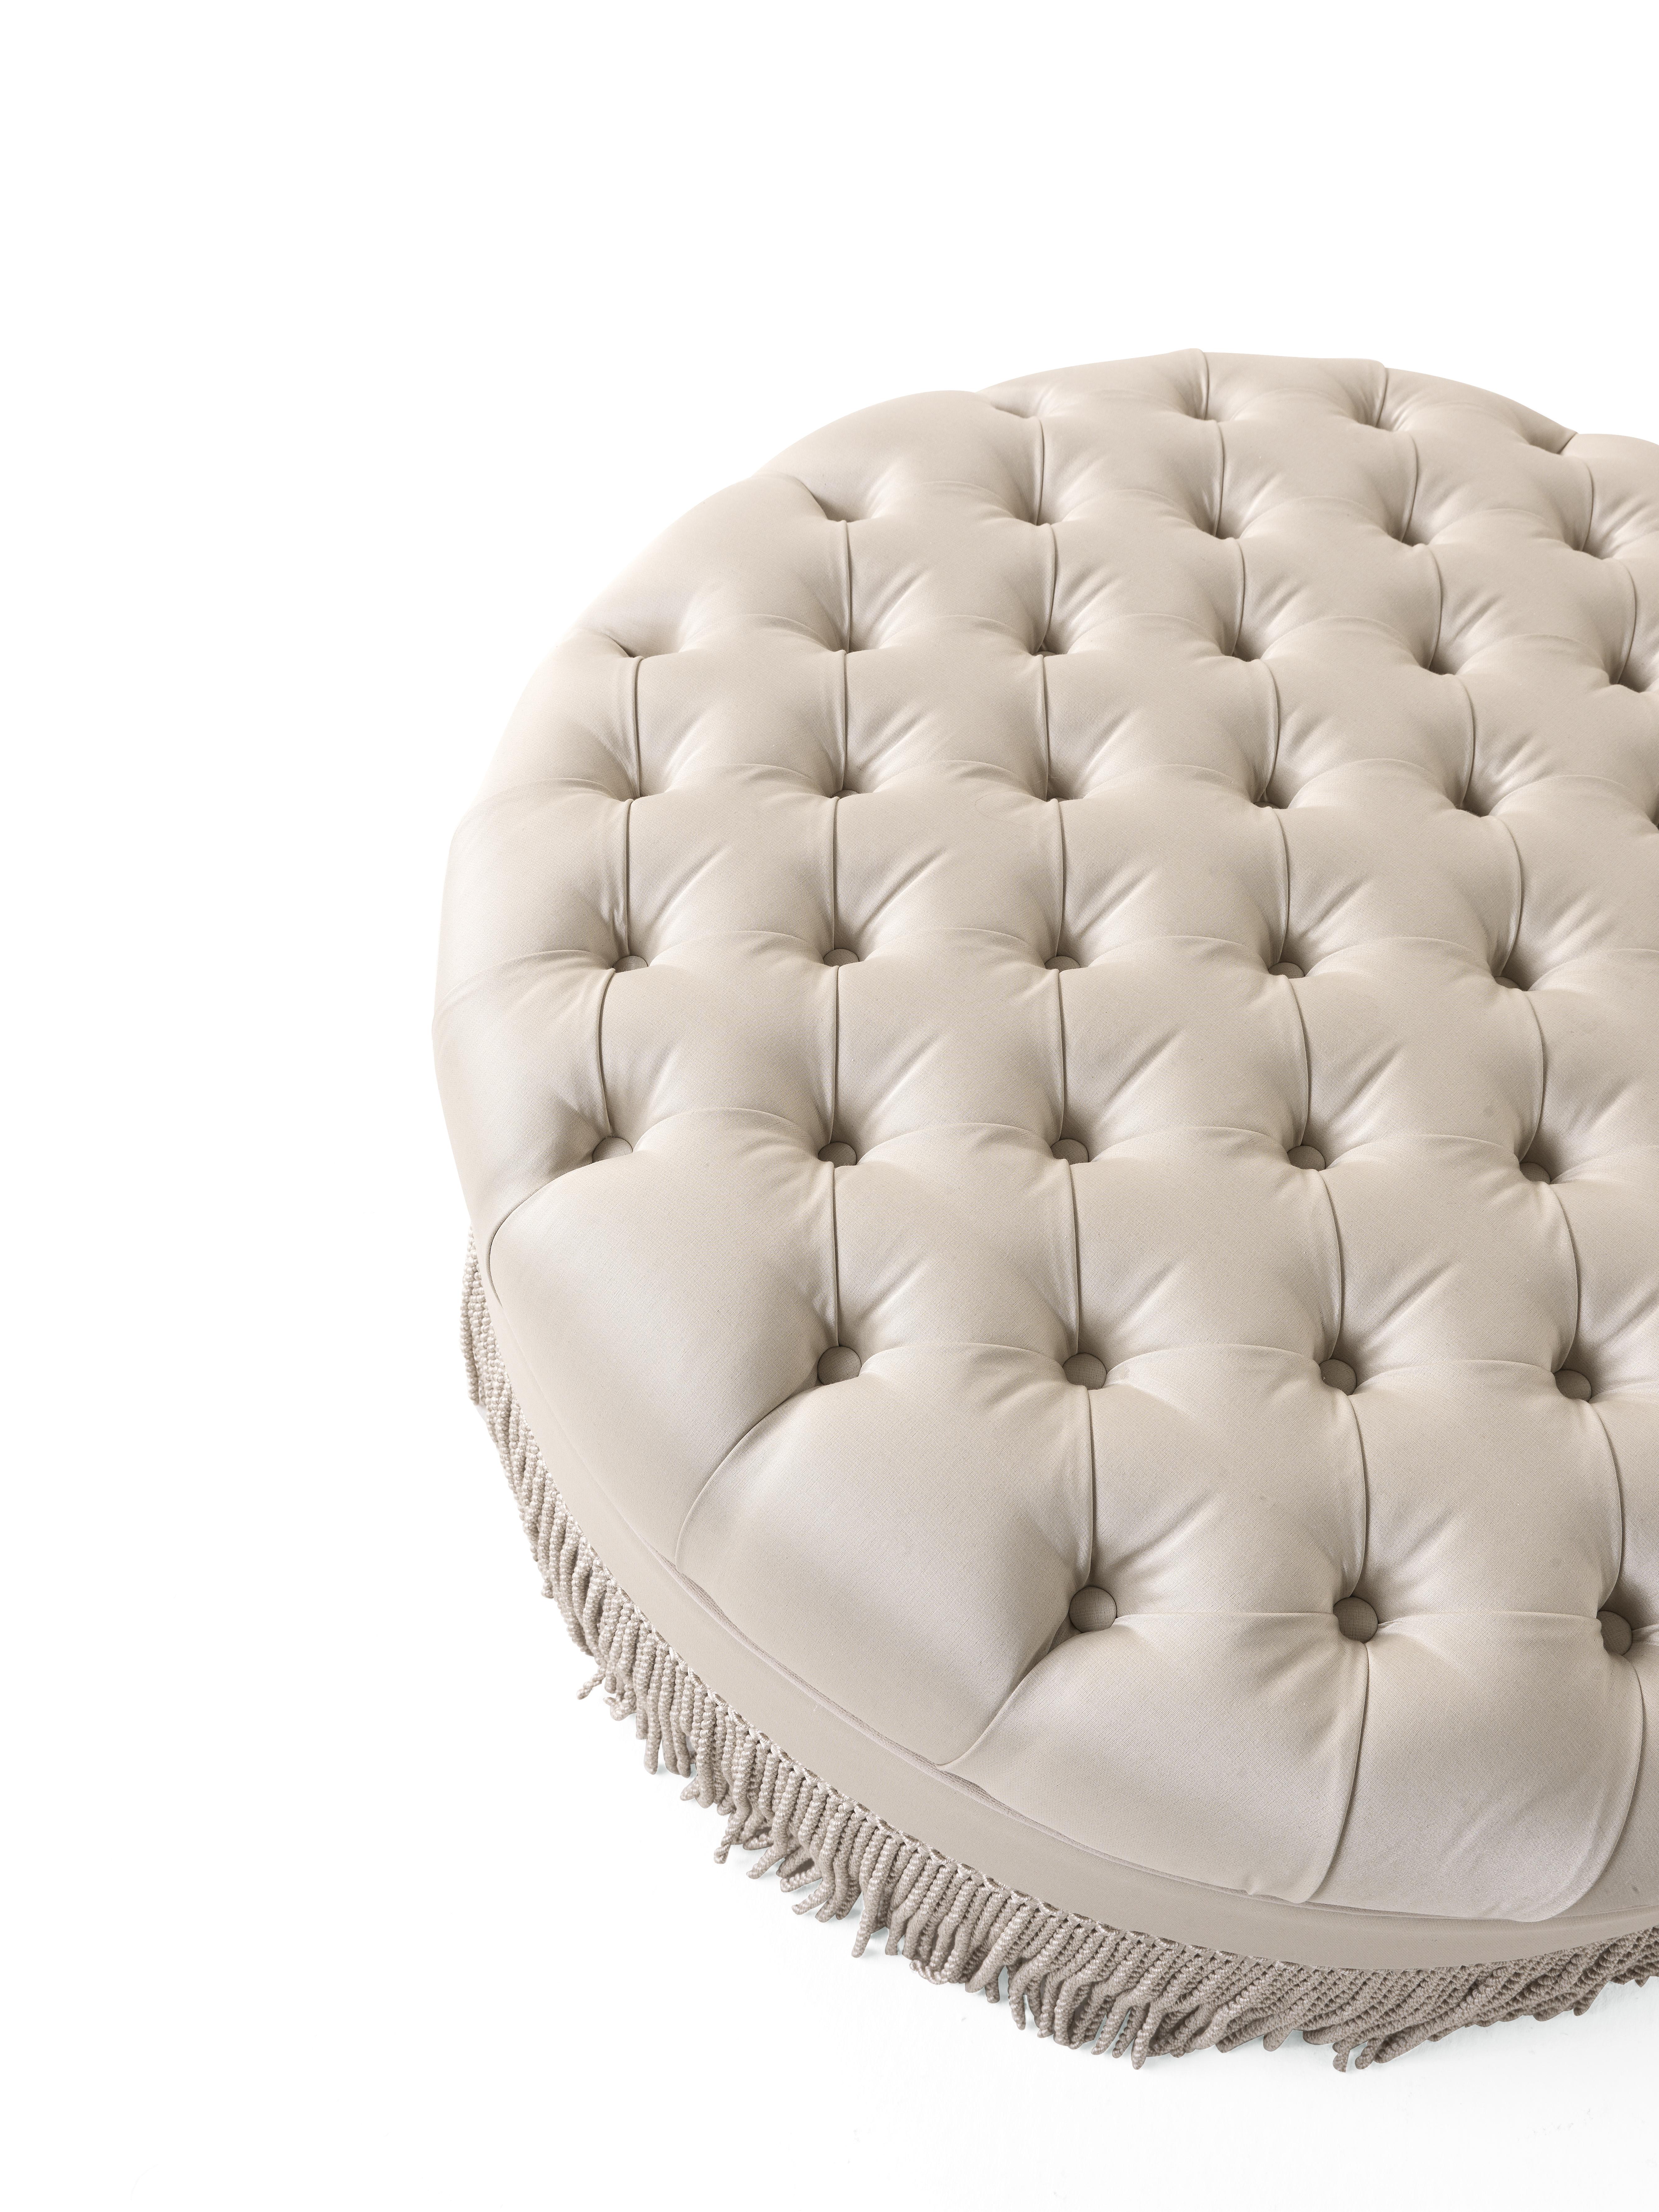 Pleasure is a line of furnishings with linear and essential shapes, characterized by an elegant and sophisticated charm. The refined workmanship and the soft velvet covering make the pouf the perfect complement to integrate and enhance settings with